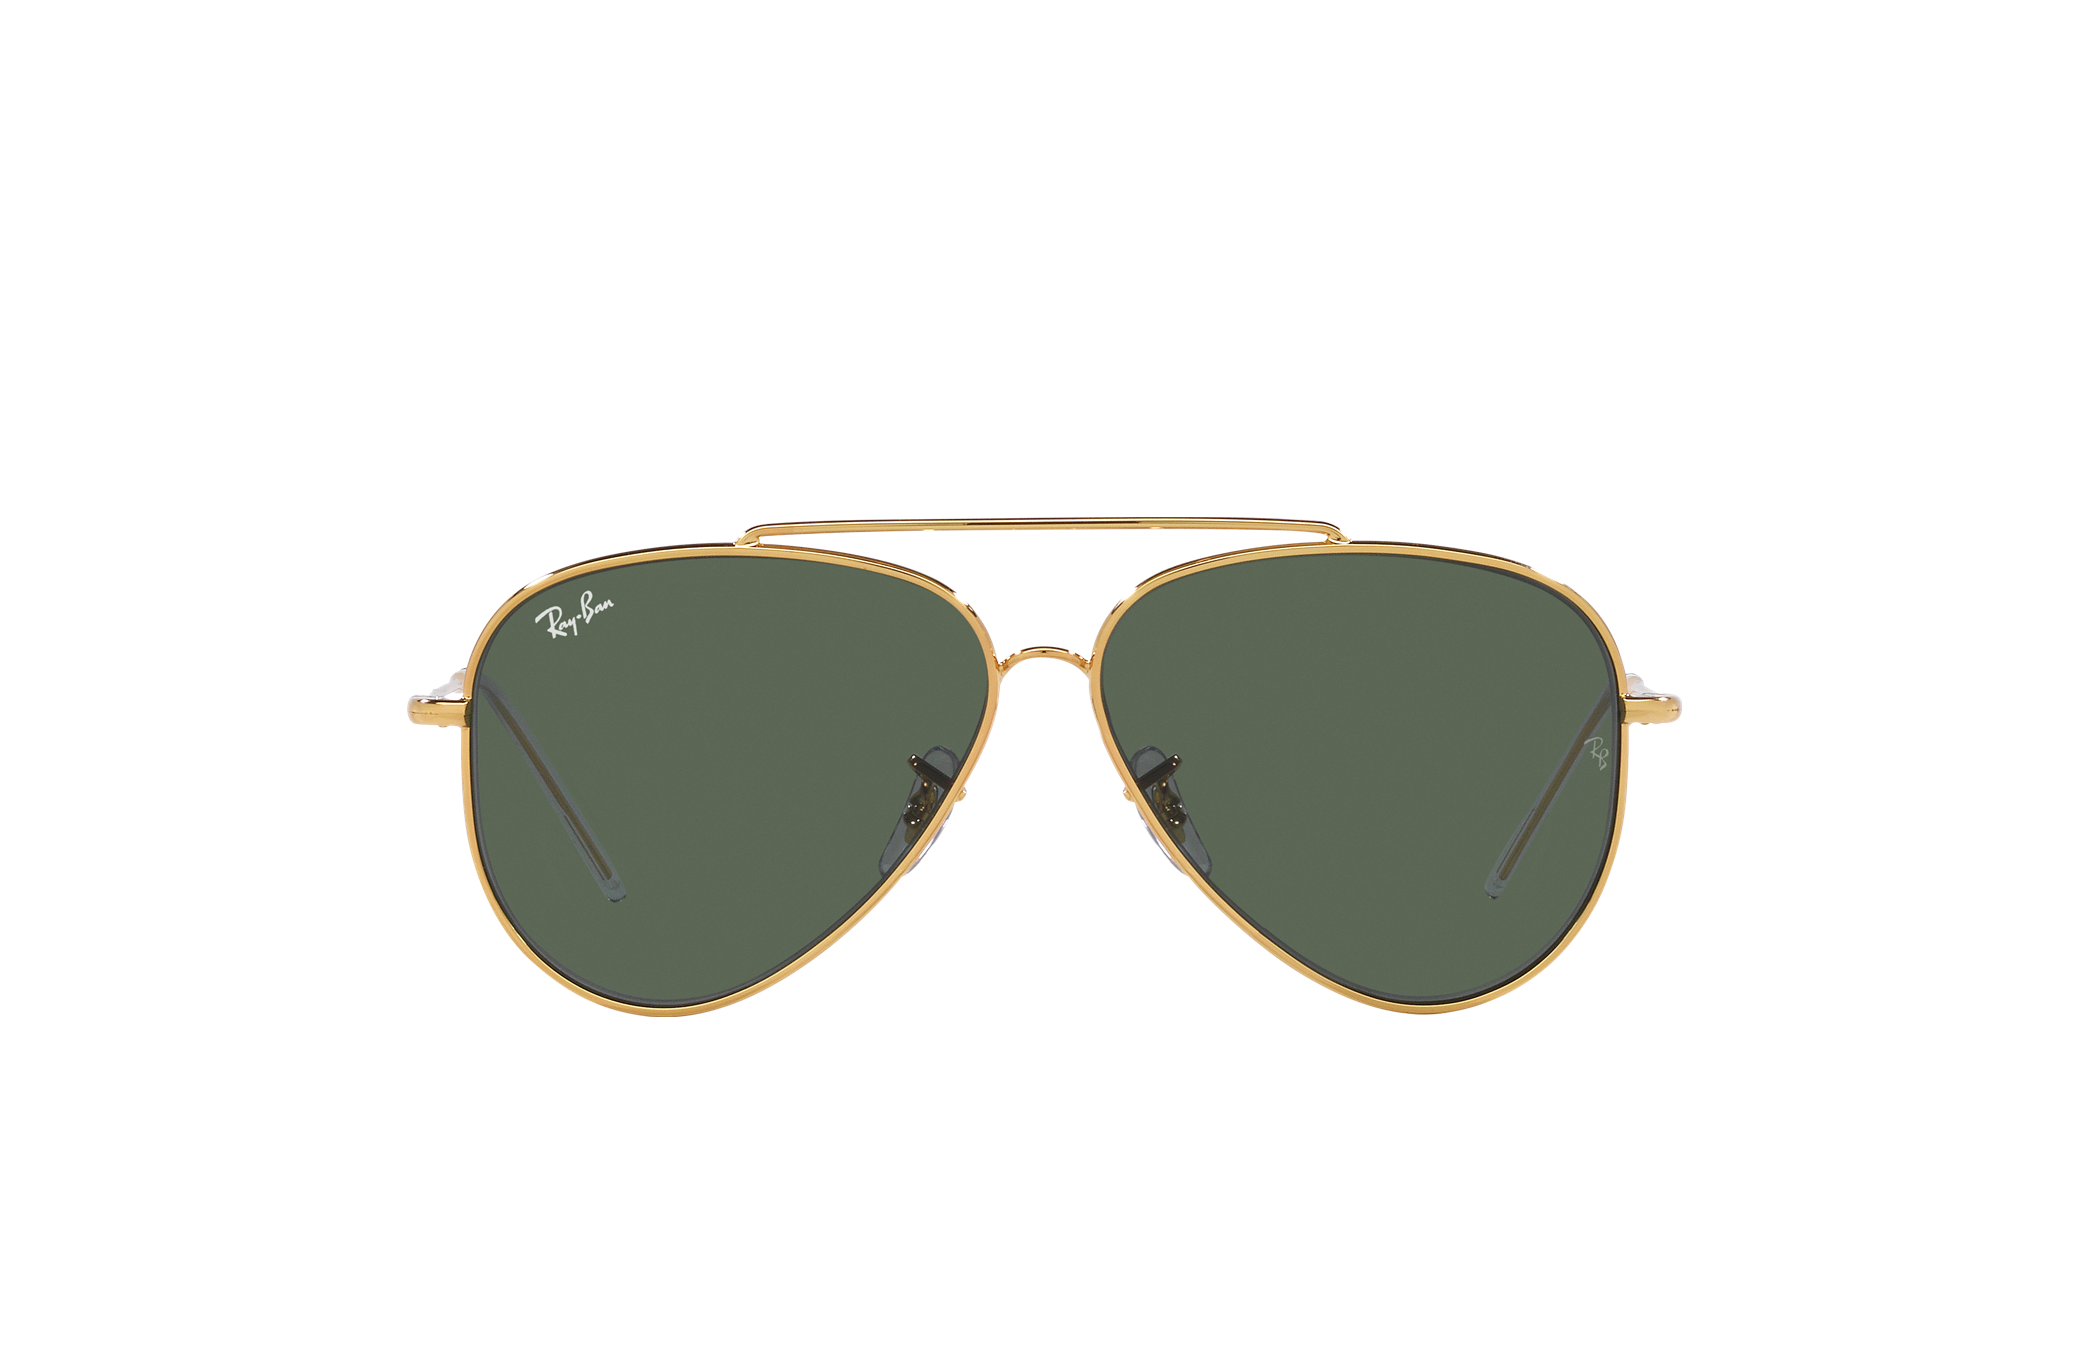 Aviator Reverse Sunglasses in Gold and Green - RBR0101S | Ray-Ban® EU